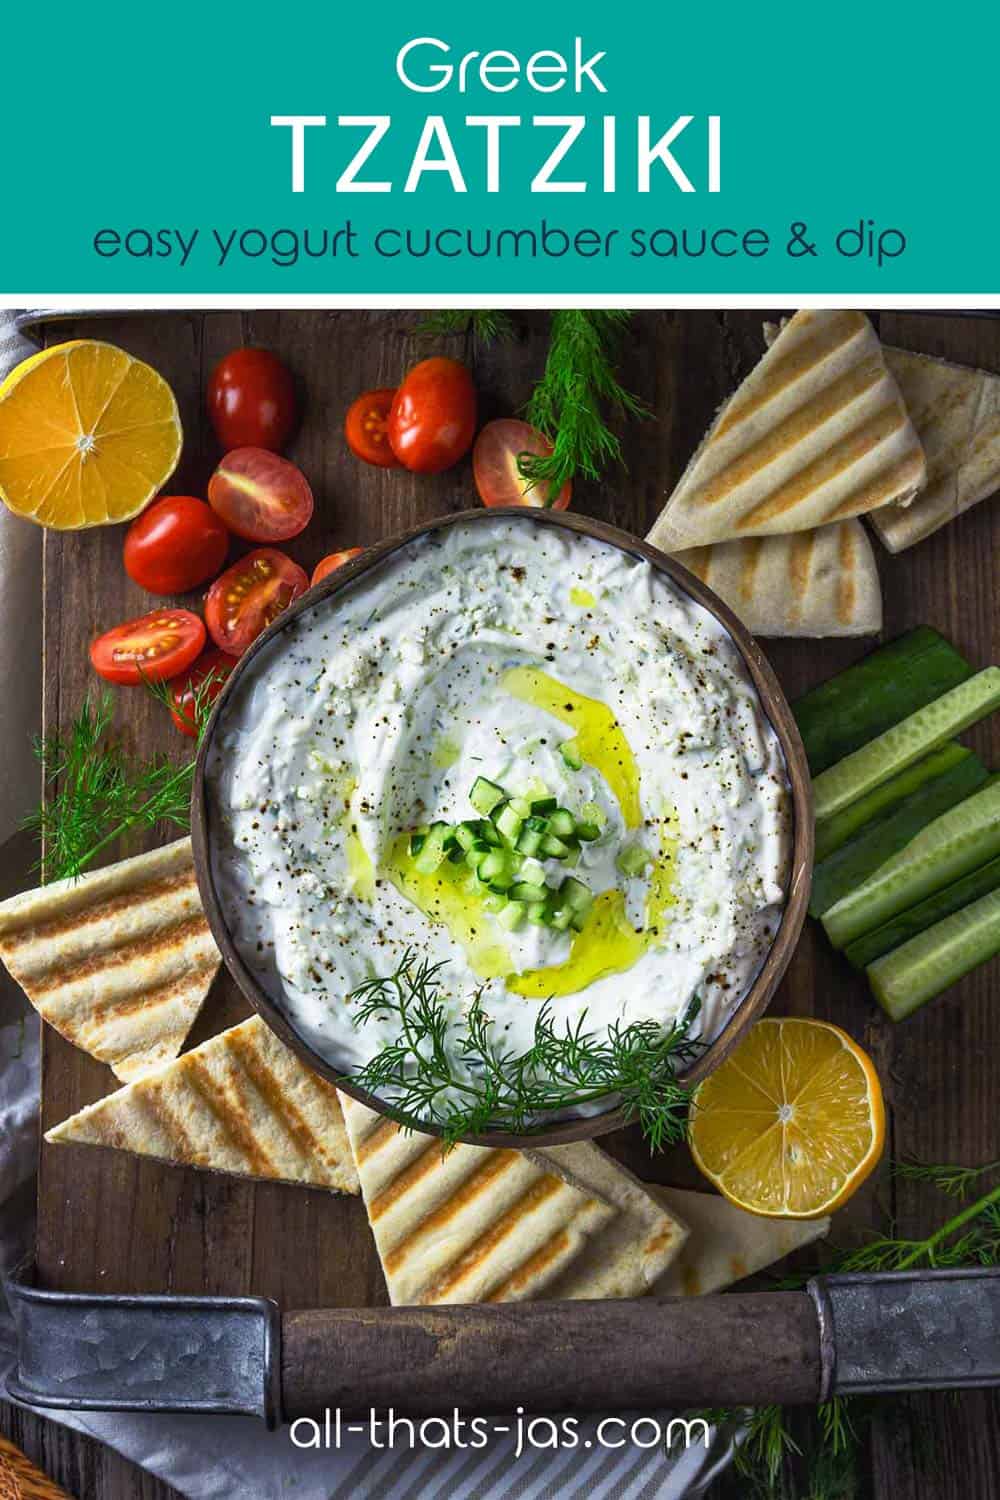 Greek yogurt dip in a bowl served with vegetables and grilled pita bread, with text overlay.